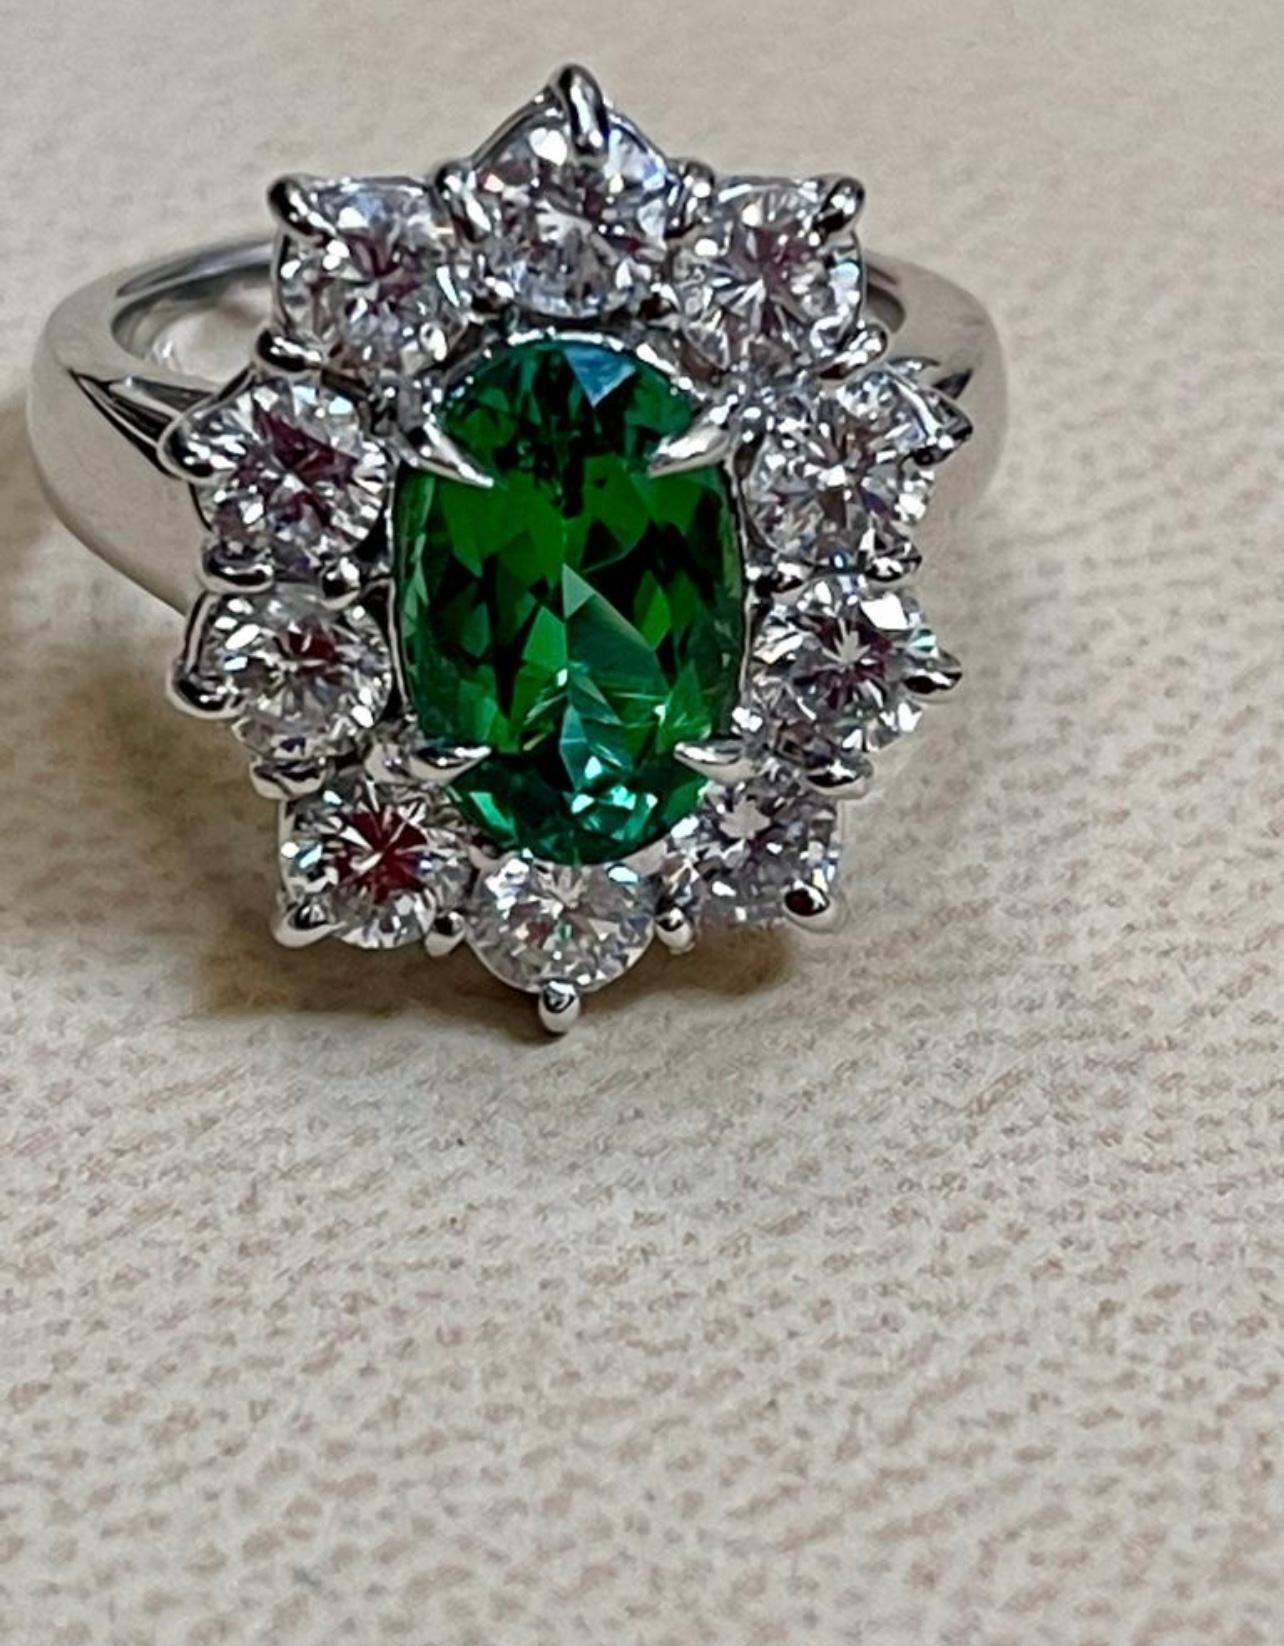 2.4 Carat Oval Tsavorite and 2 Carat Diamond in 18 Karat White Gold Ring Estate Size 6
Tsavorite of this color and size are very precious!
Approximately 2.4 Carat  long Oval cut Tsavorite and Diamond Ring, Estate with no color enhancement.
Gold: 18